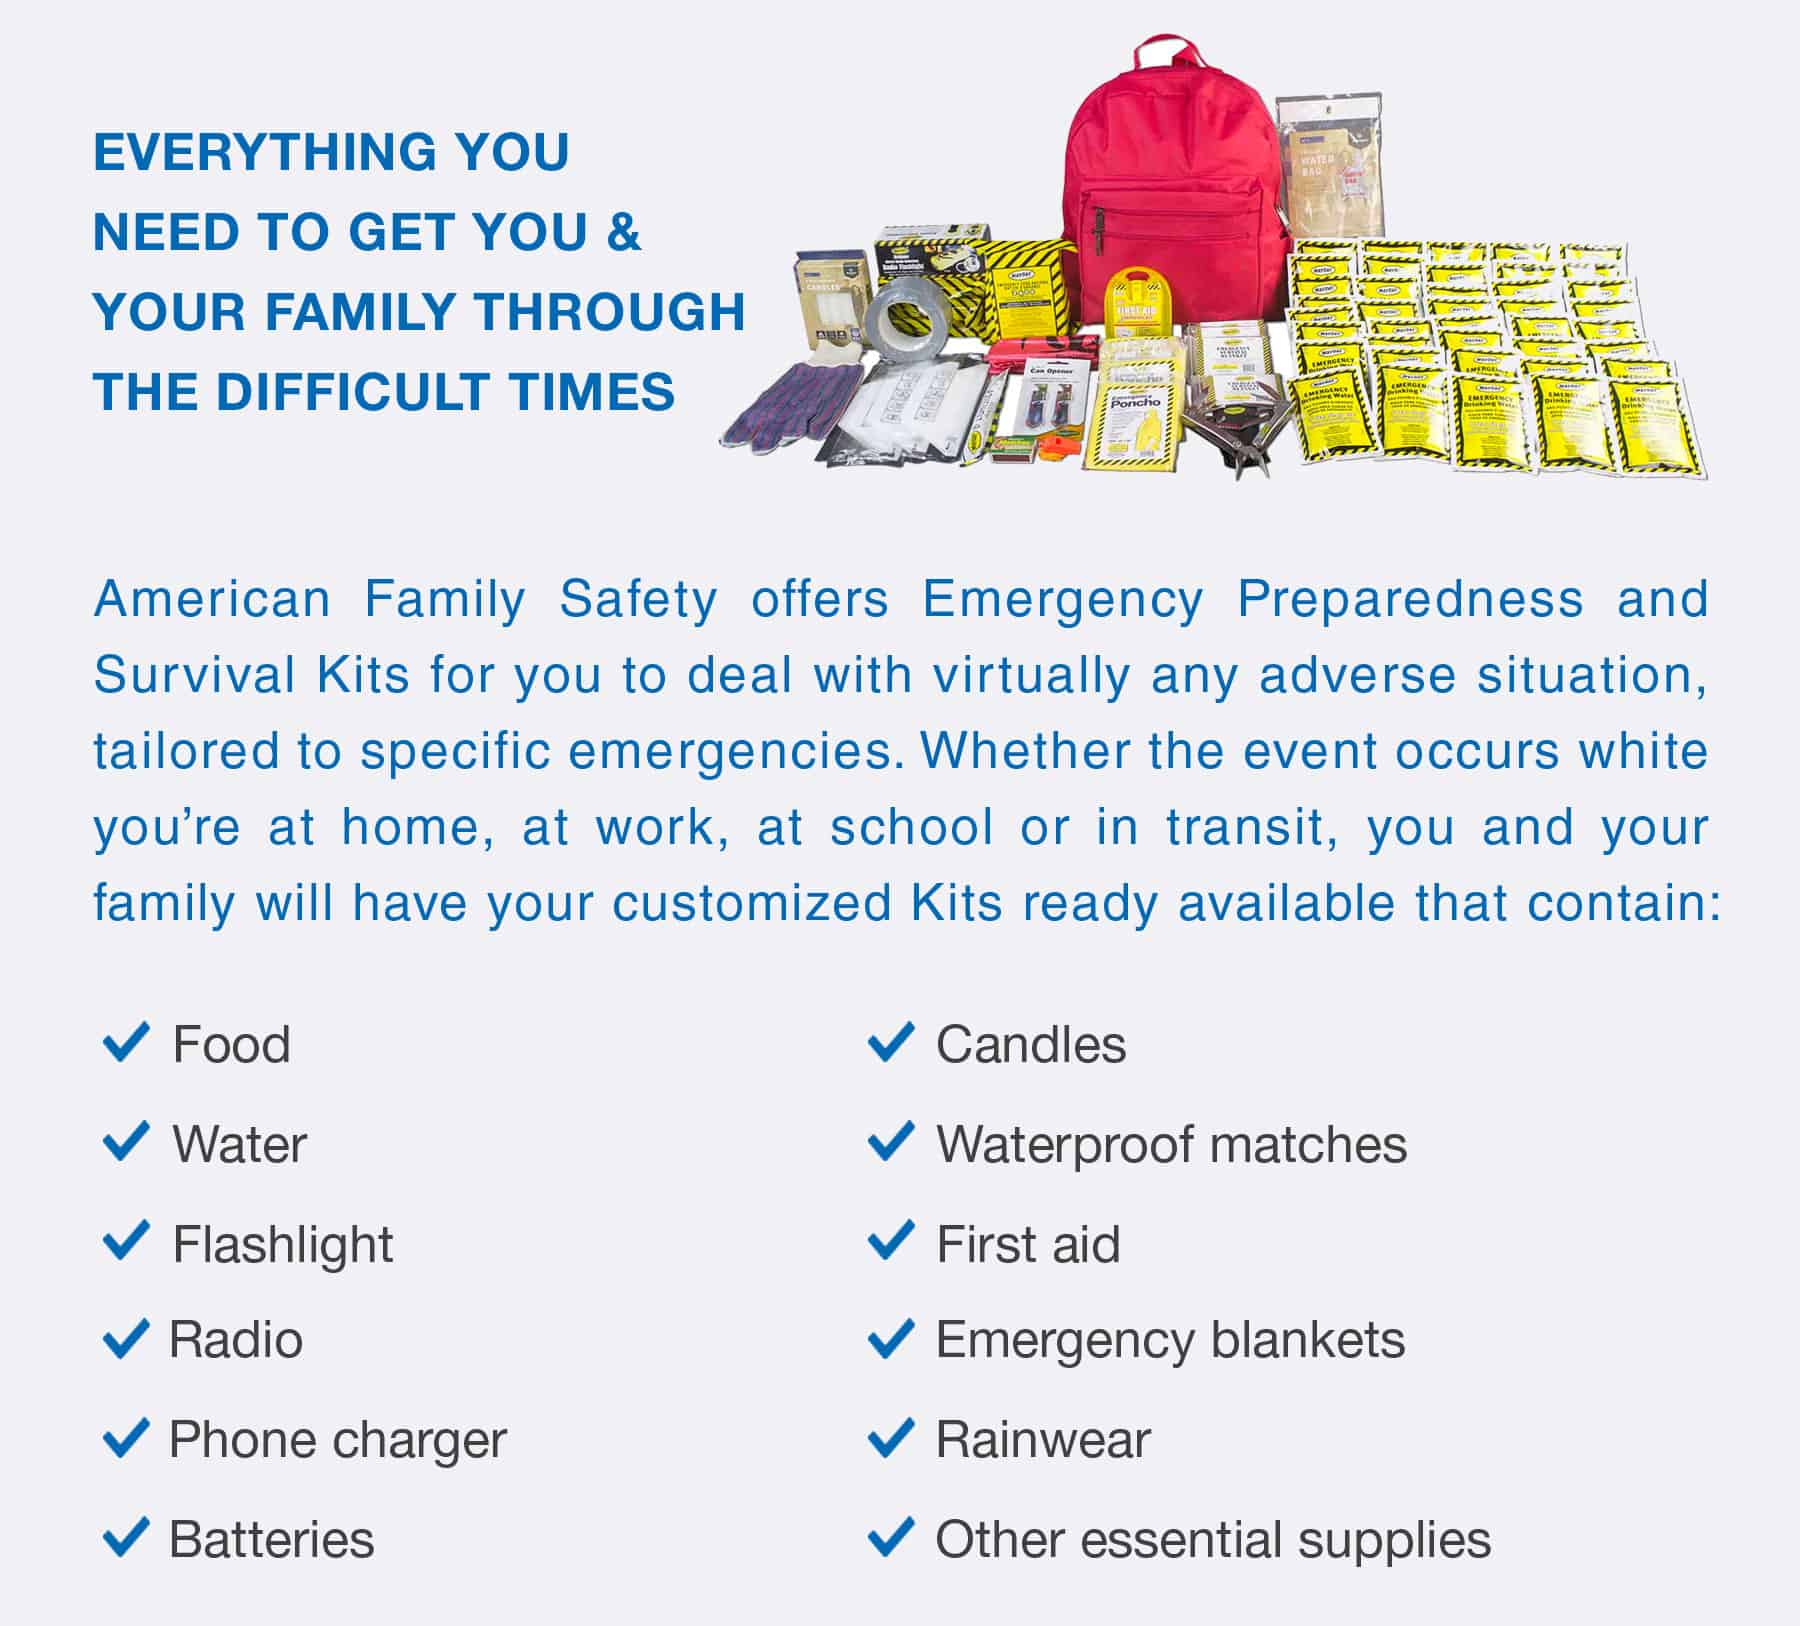 Prepared for the Coronavirus? American Family Safety is a leading provider of Emergency Kits